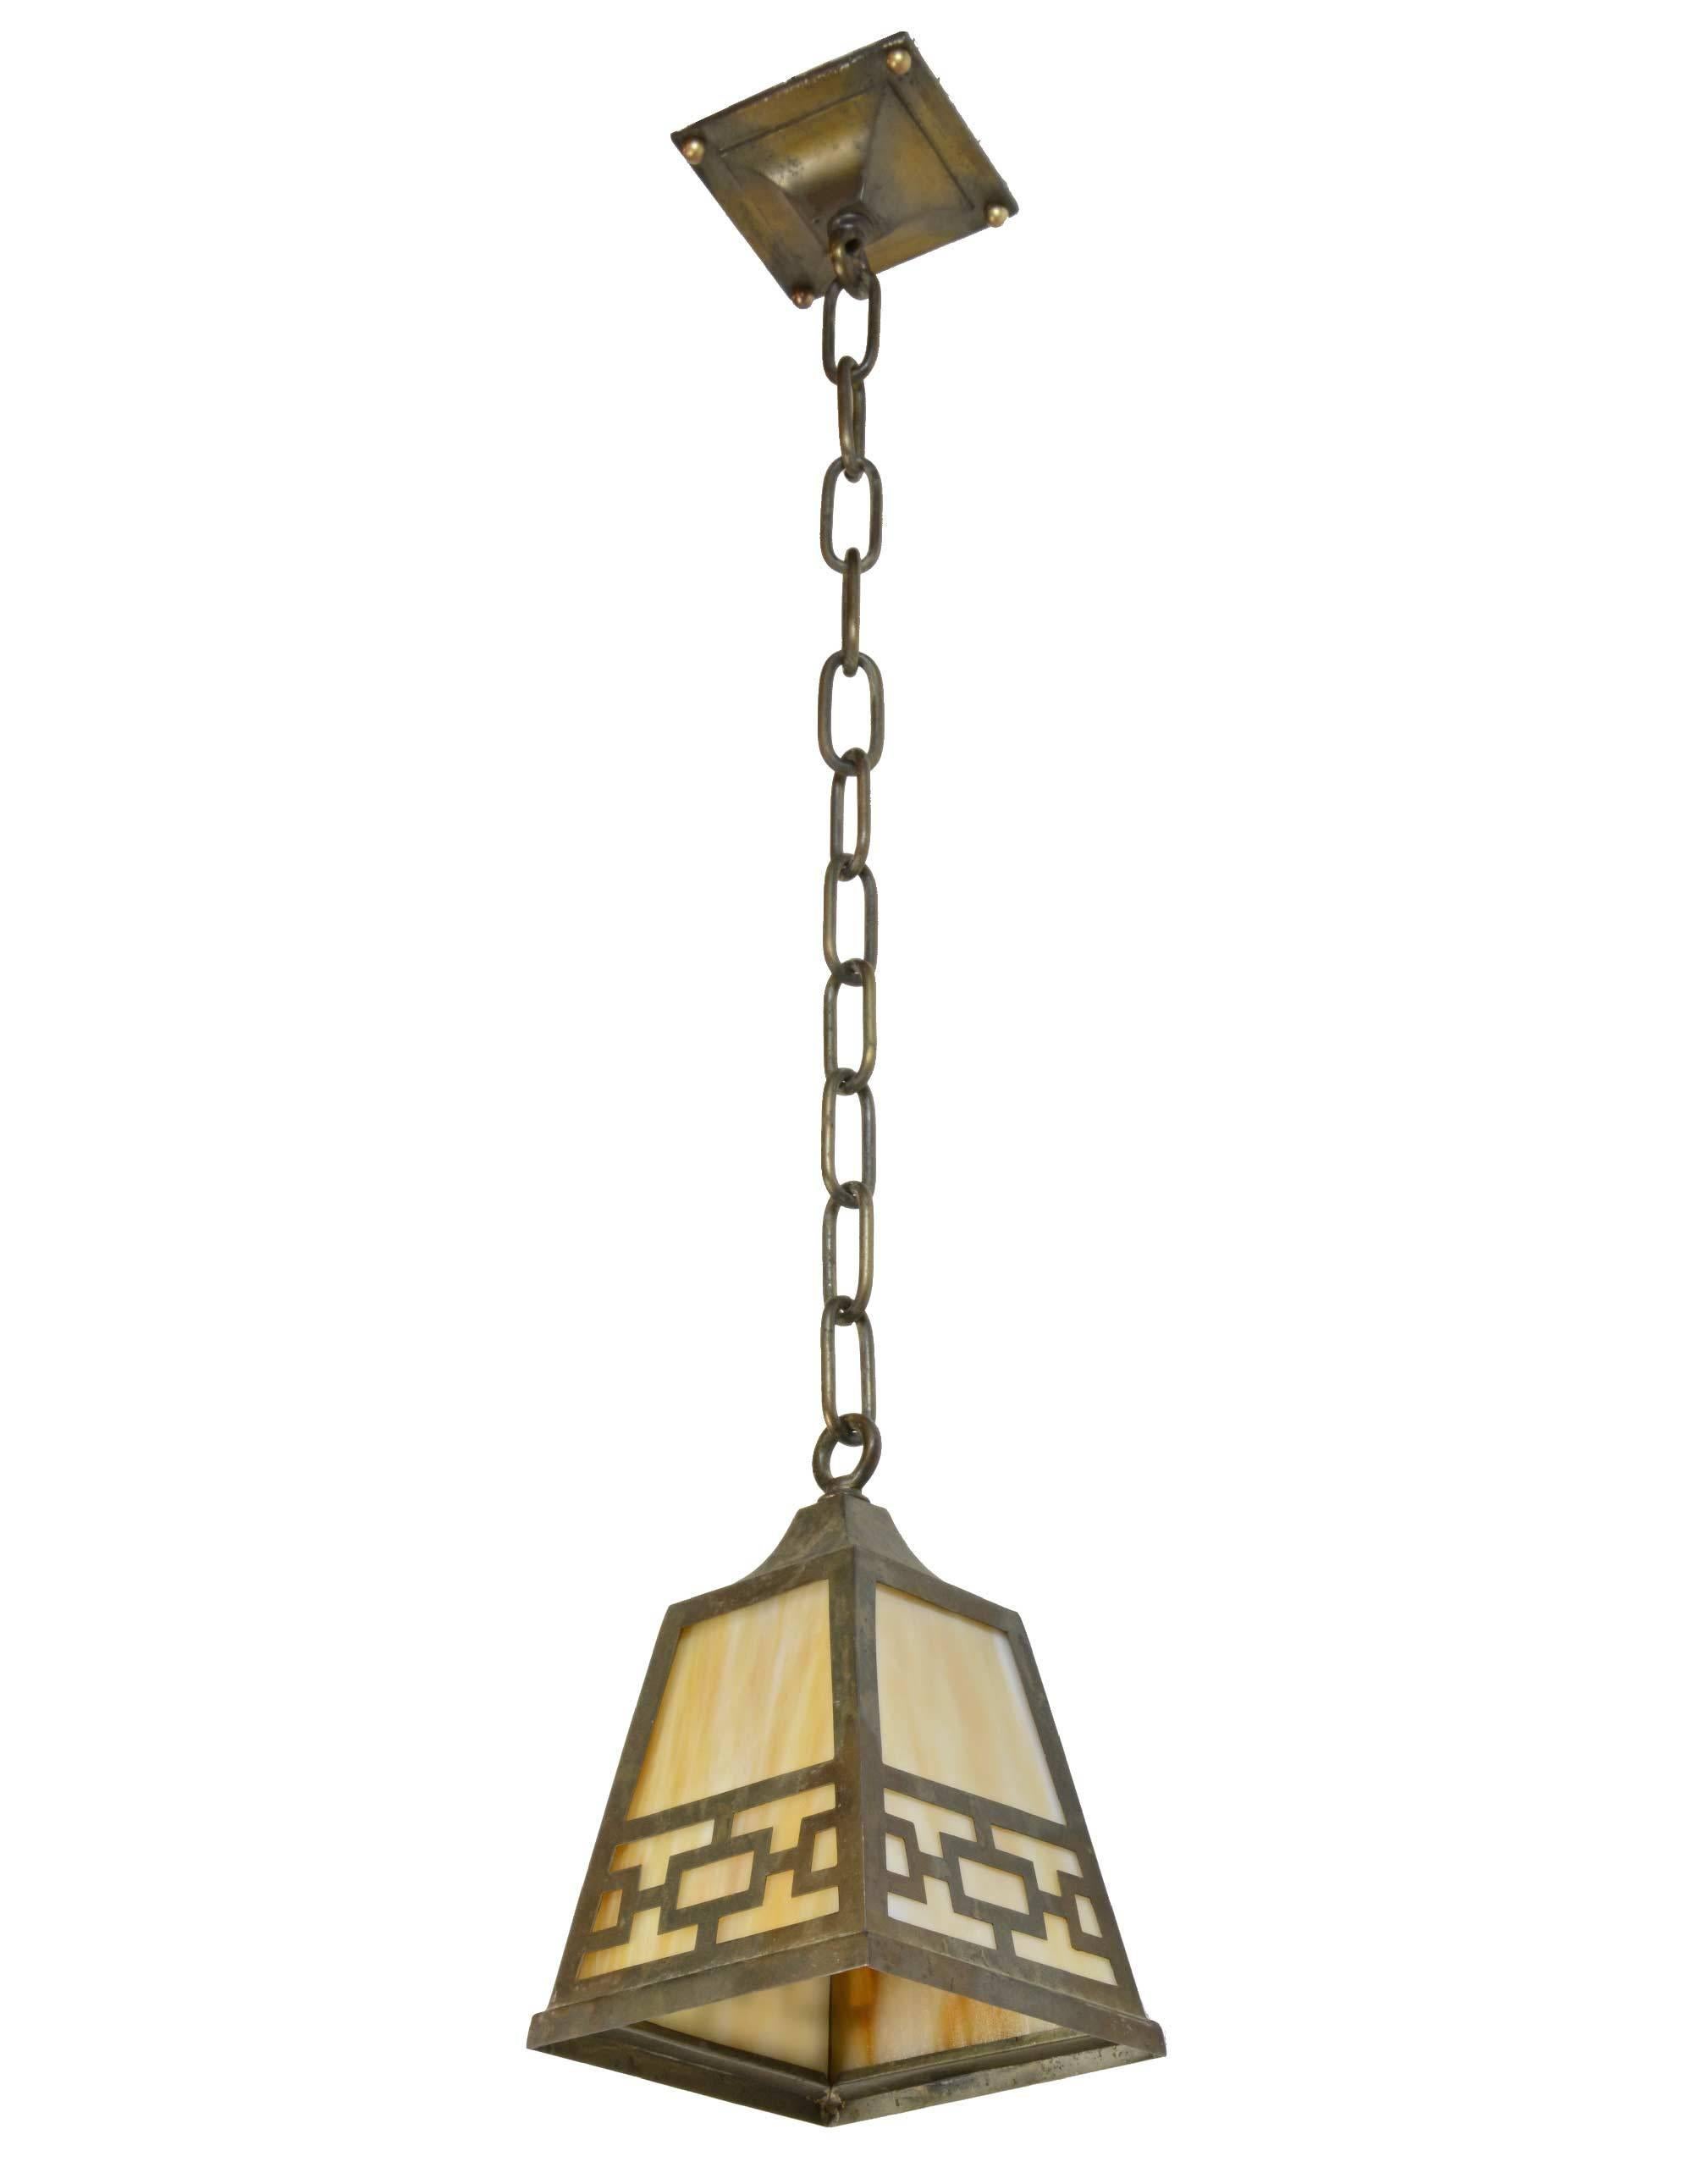 This quaint brass mission style pendant has a tapered square shade with amber slag glass panels and it's original canopy and chain,

circa 1915.
Finish: Original
Country of origin: USA
Single medium socket.

Measures: 29